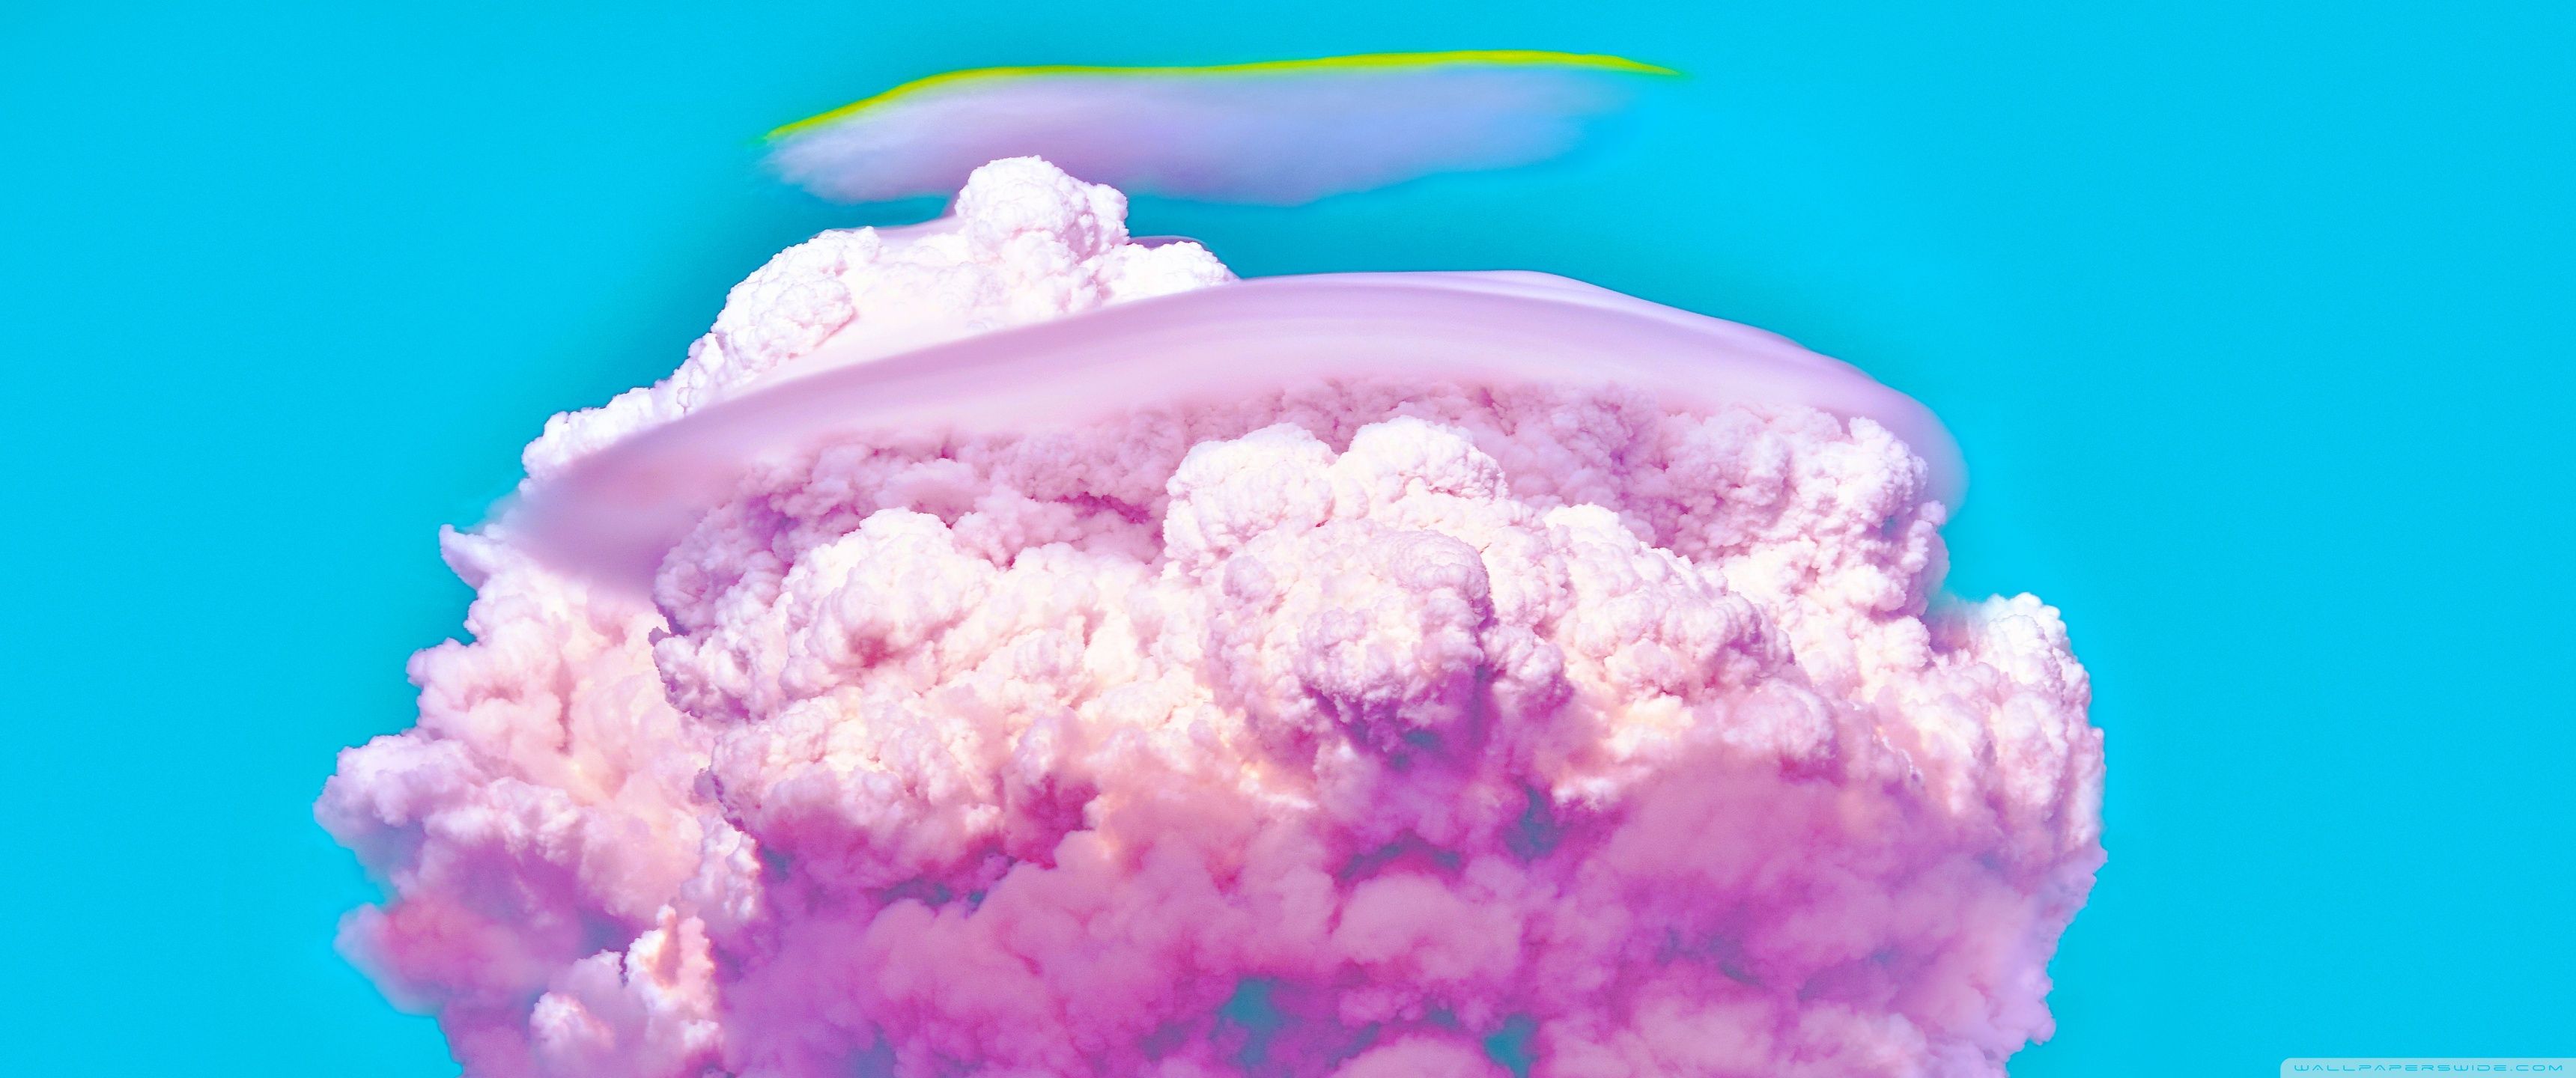 A pink cloud with blue sky in the background - 3440x1440